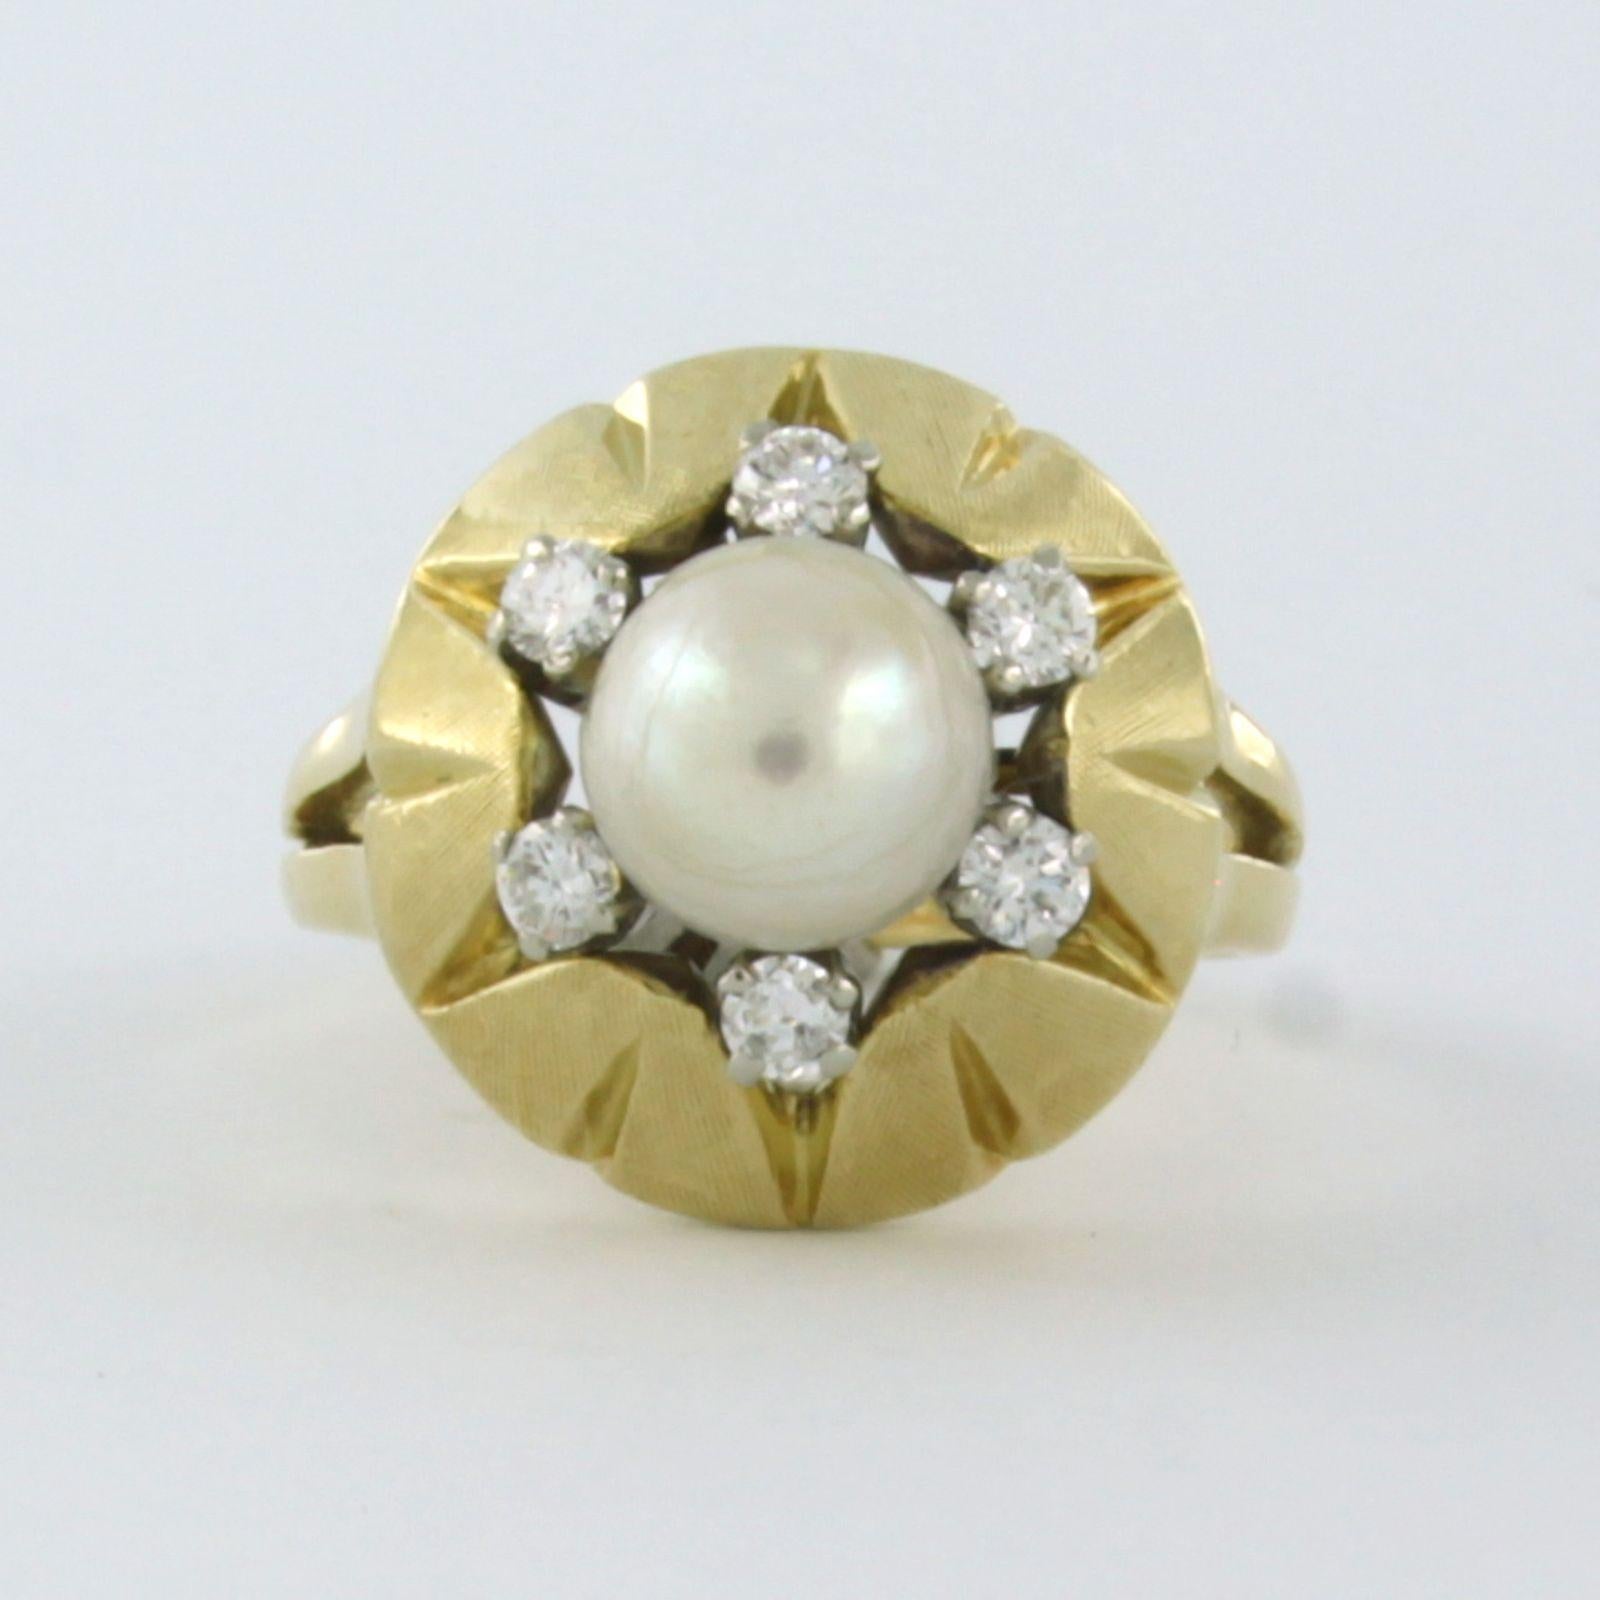 18k bicolour gold ring with pearl and brilliant cut diamond 0.25 carat F/G - VS/SI - ring size U.S. 4.5 - EU. 15.25(48)

Detailed description

The top of the ring is 1.5 cm wide

Weight 8.2 grams

ring size U.S. 4.5 - EU. 15.25(48), the ring can be